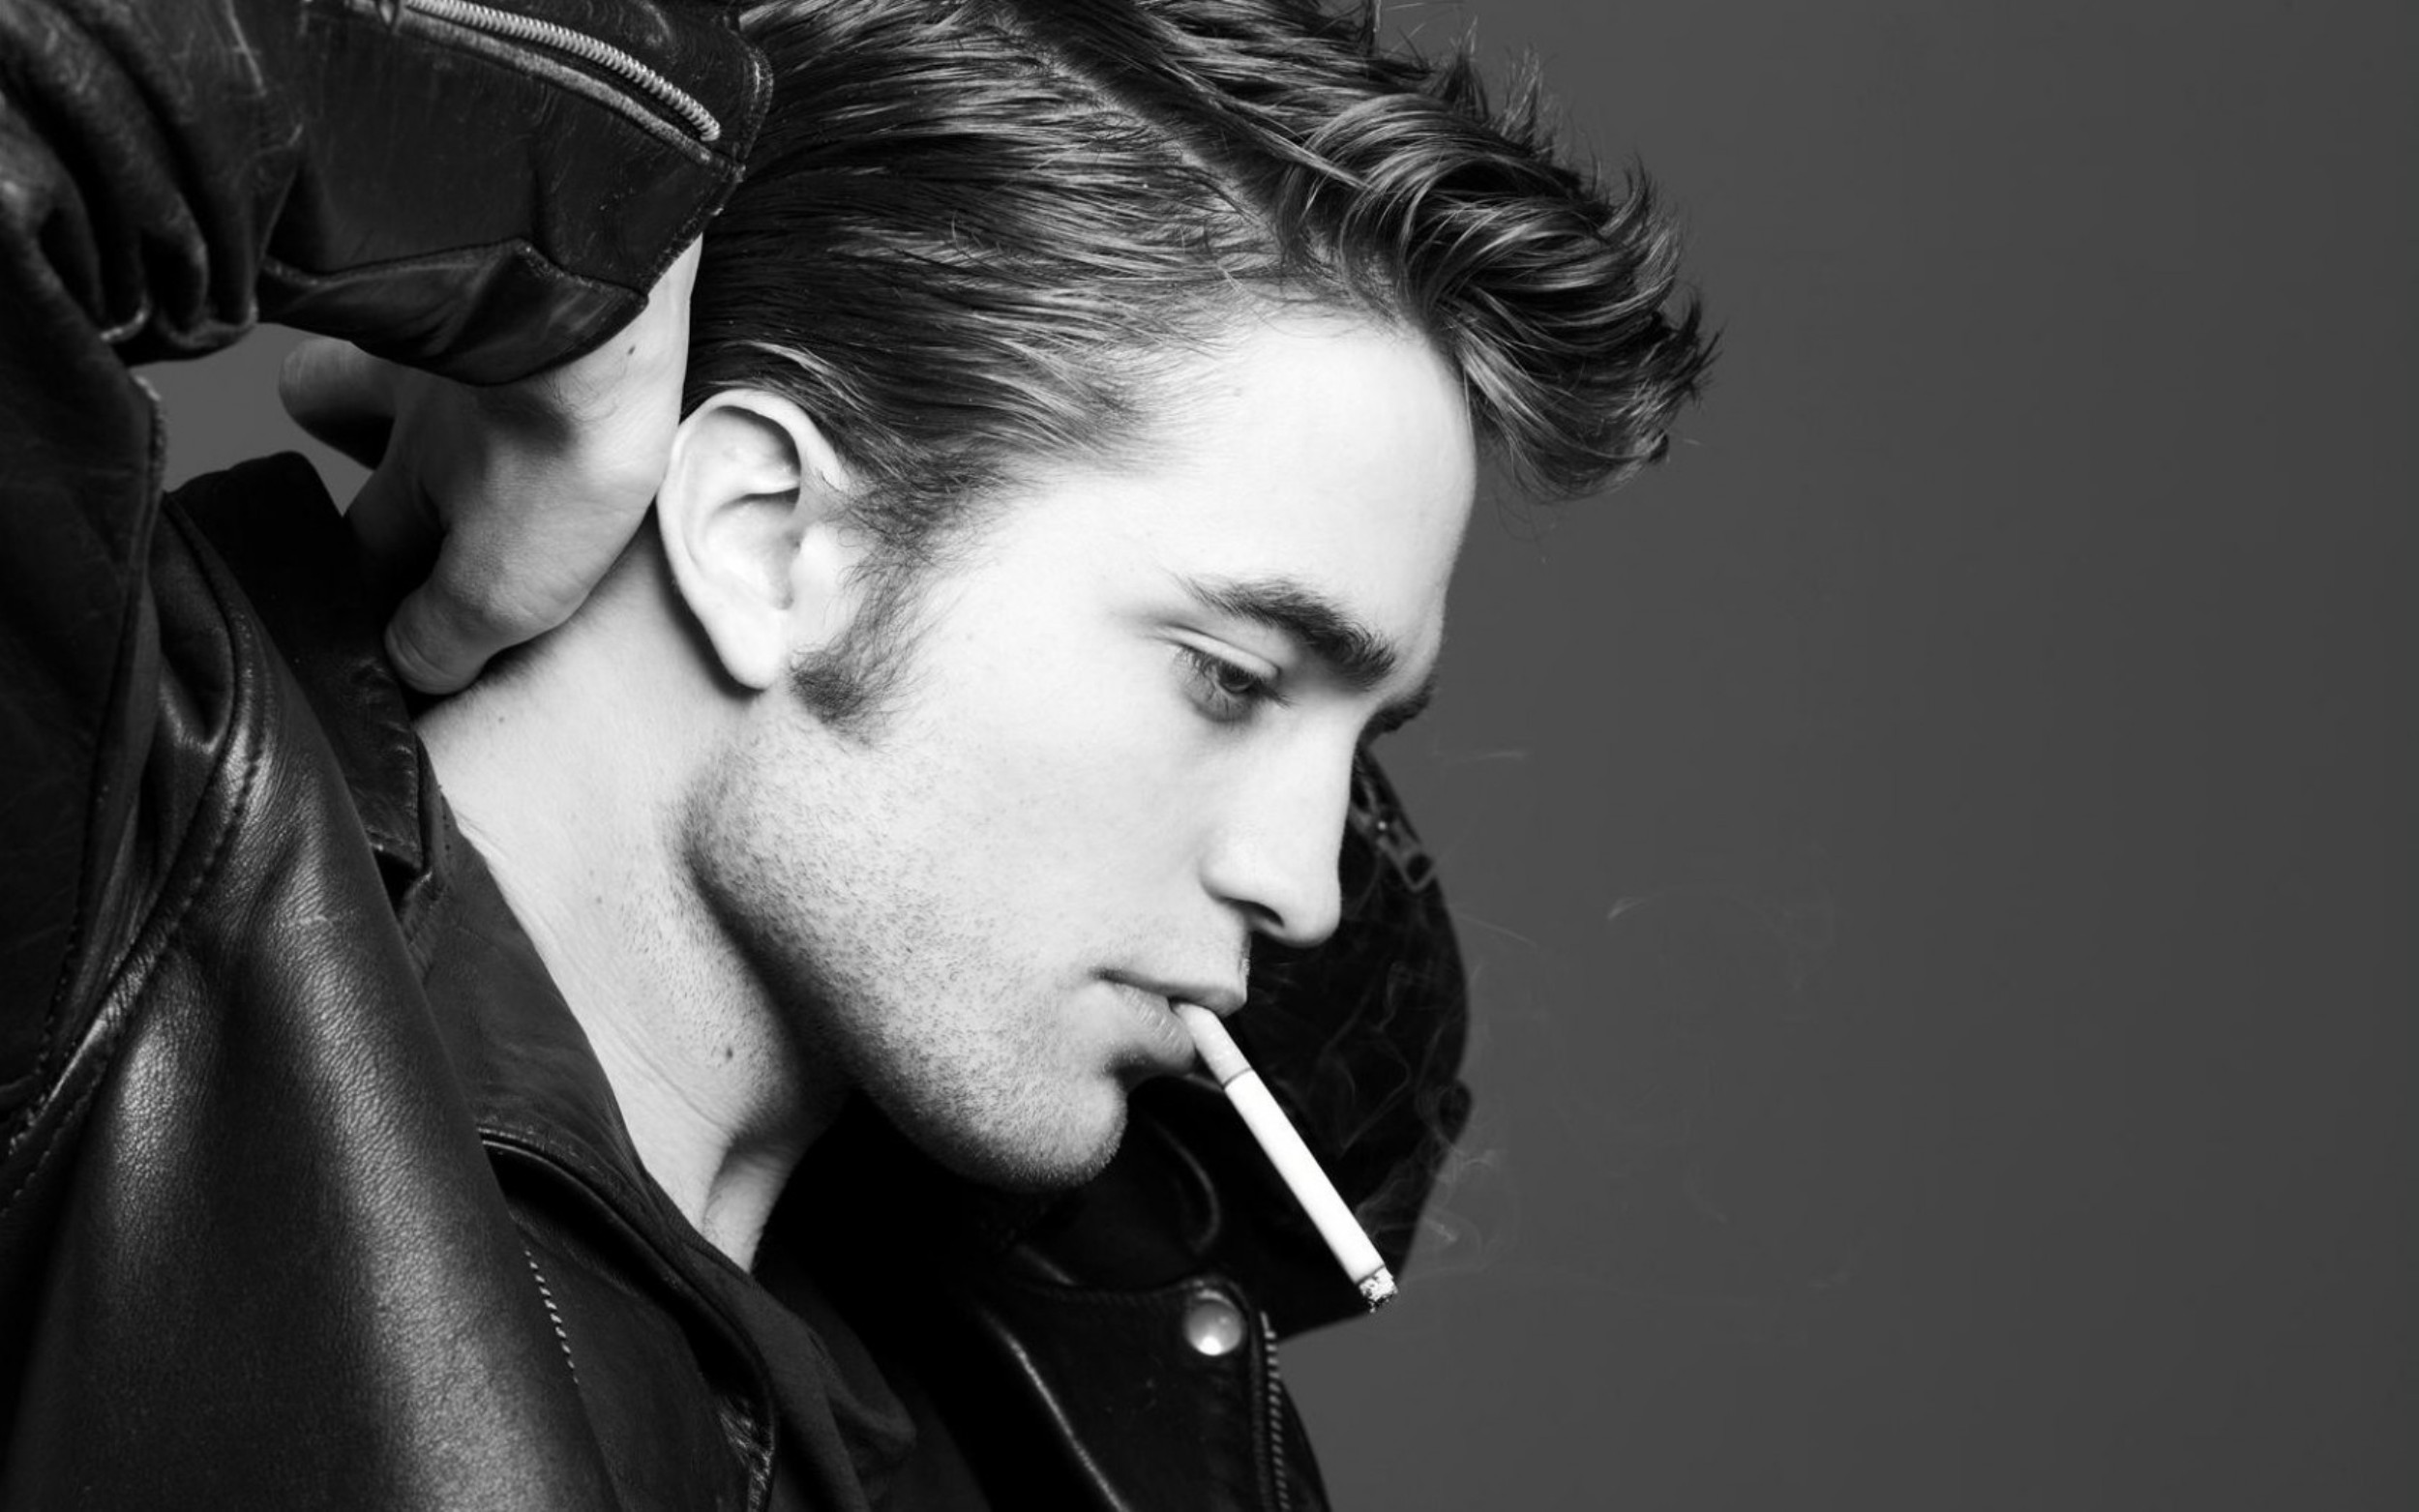 robert pattinson hd wallpapers,hair,hairstyle,nose,chin,black and white